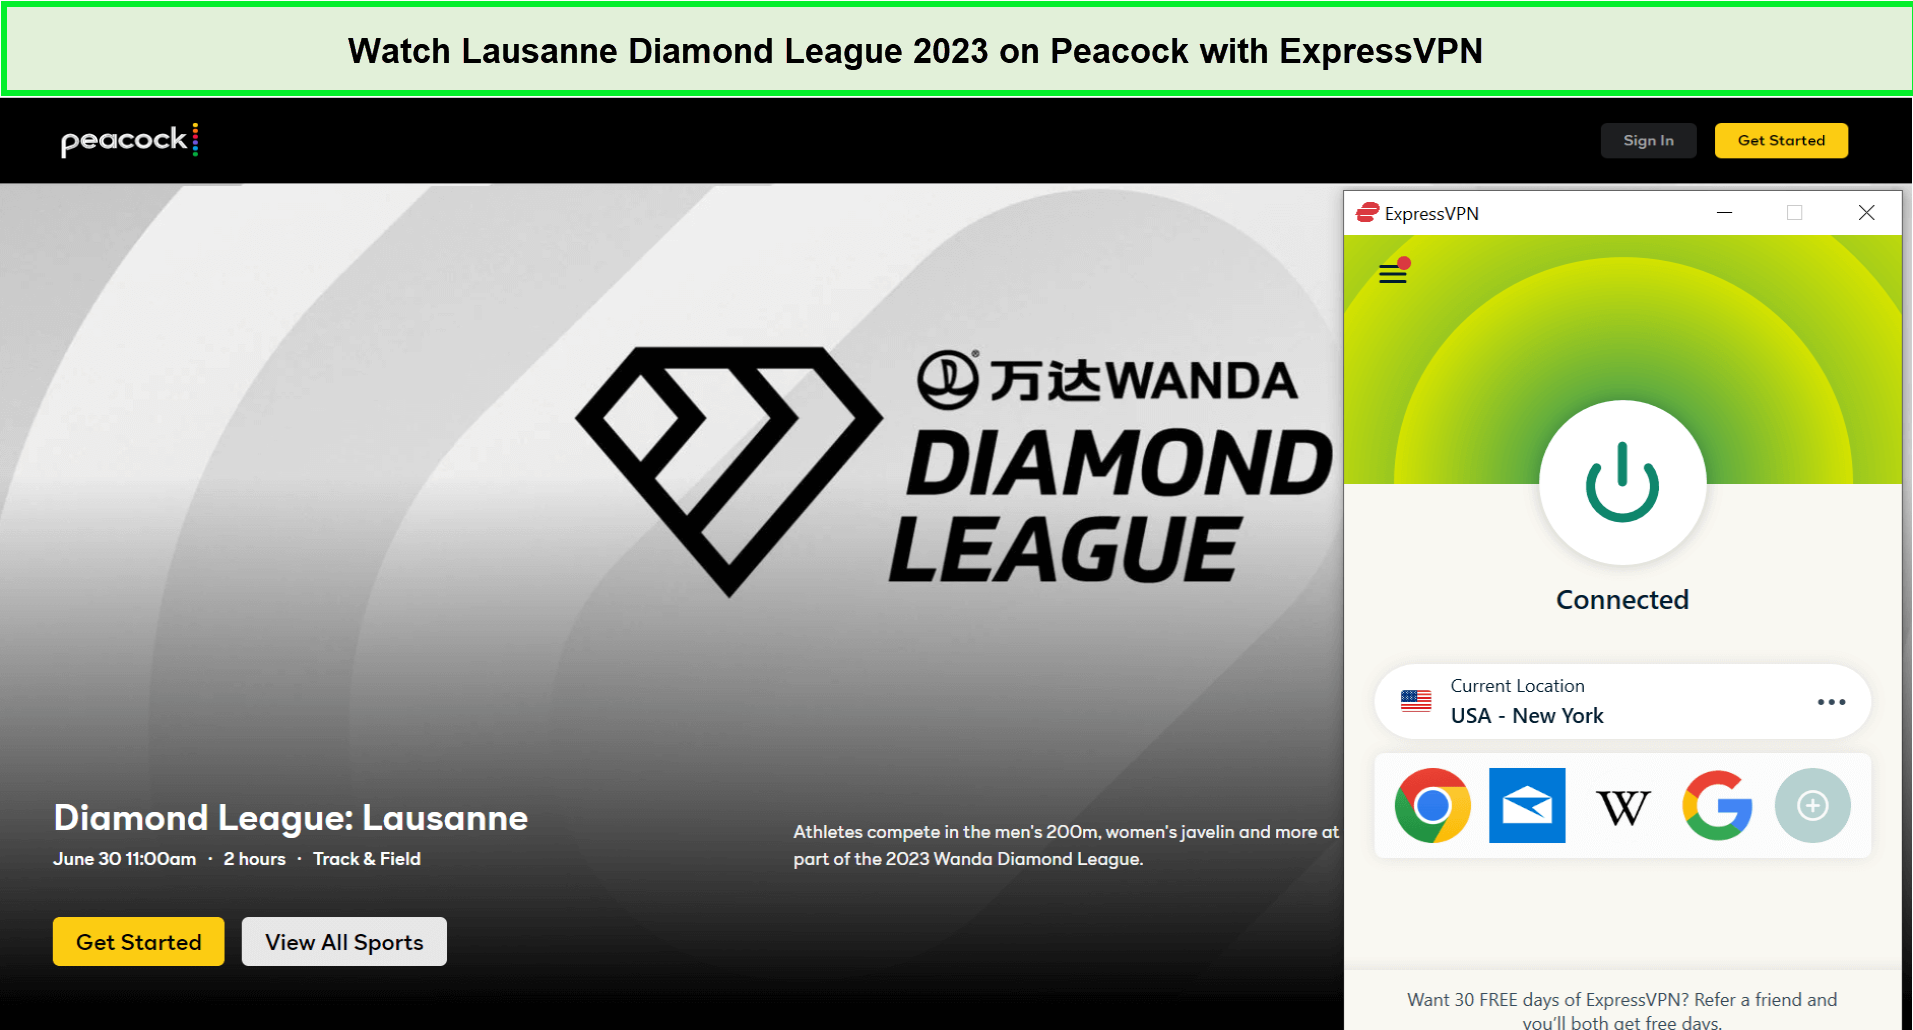 Watch-Lausanne-Diamond-League-2023-in-New Zealand-on-Peacock-with-ExpressVPN